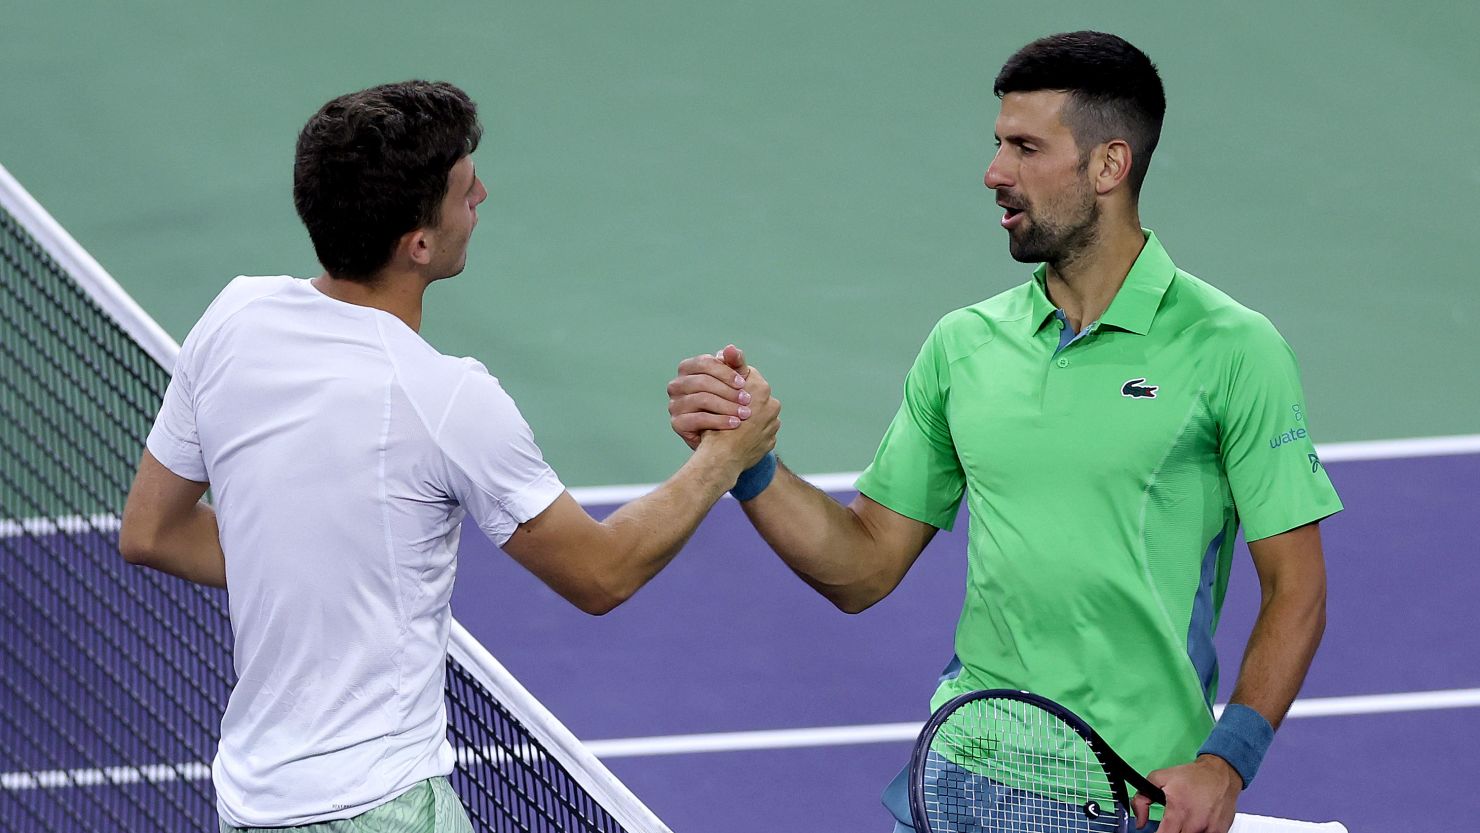 Novak Djokovic and Luca Nardi shake hands after Nardi recorded his famous victory at Indian Wells.